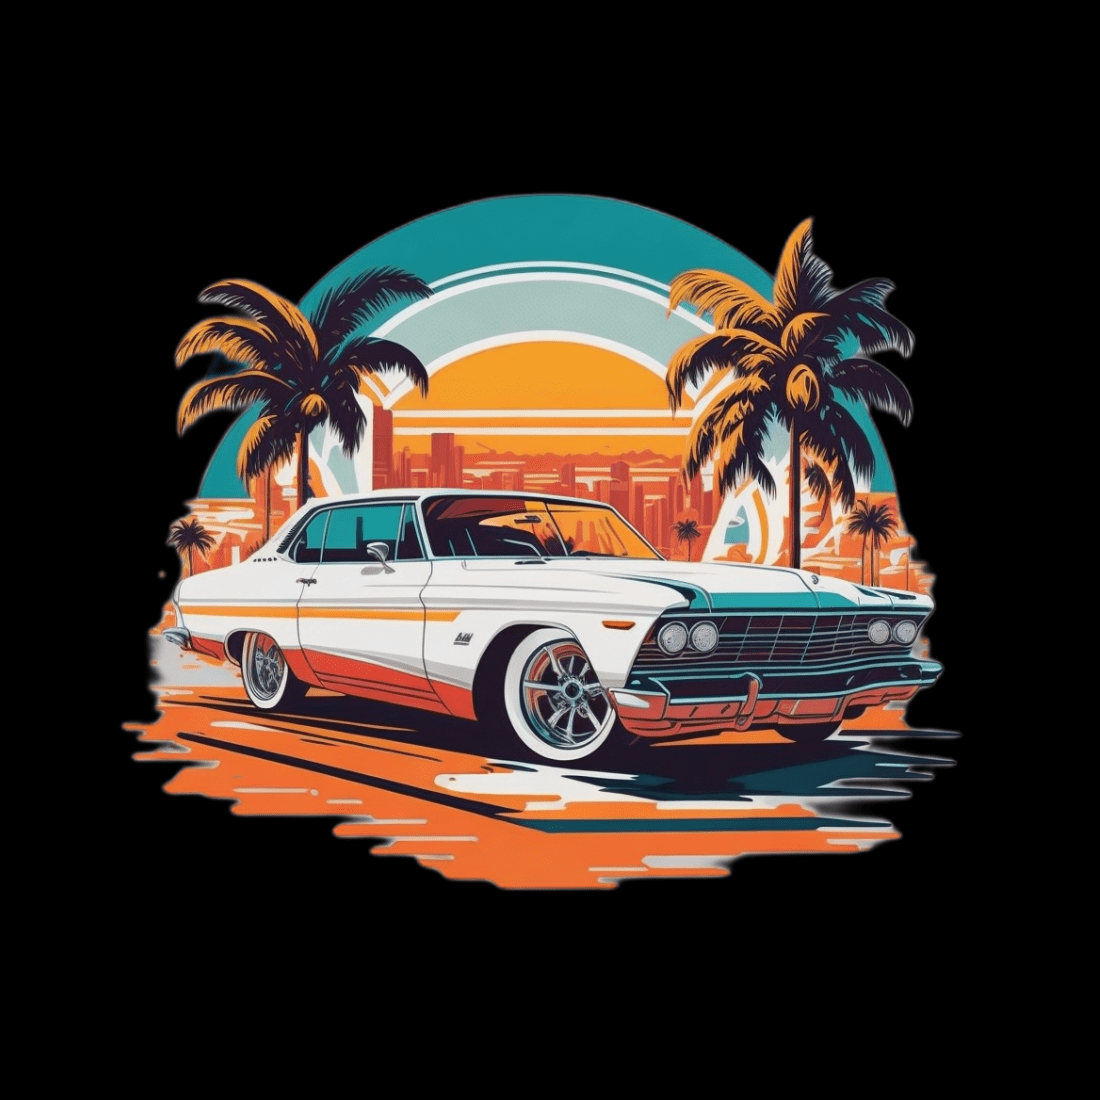 Classic car with Miami sunset view design for T-Shirt ,stock image , illustration etc preview image.